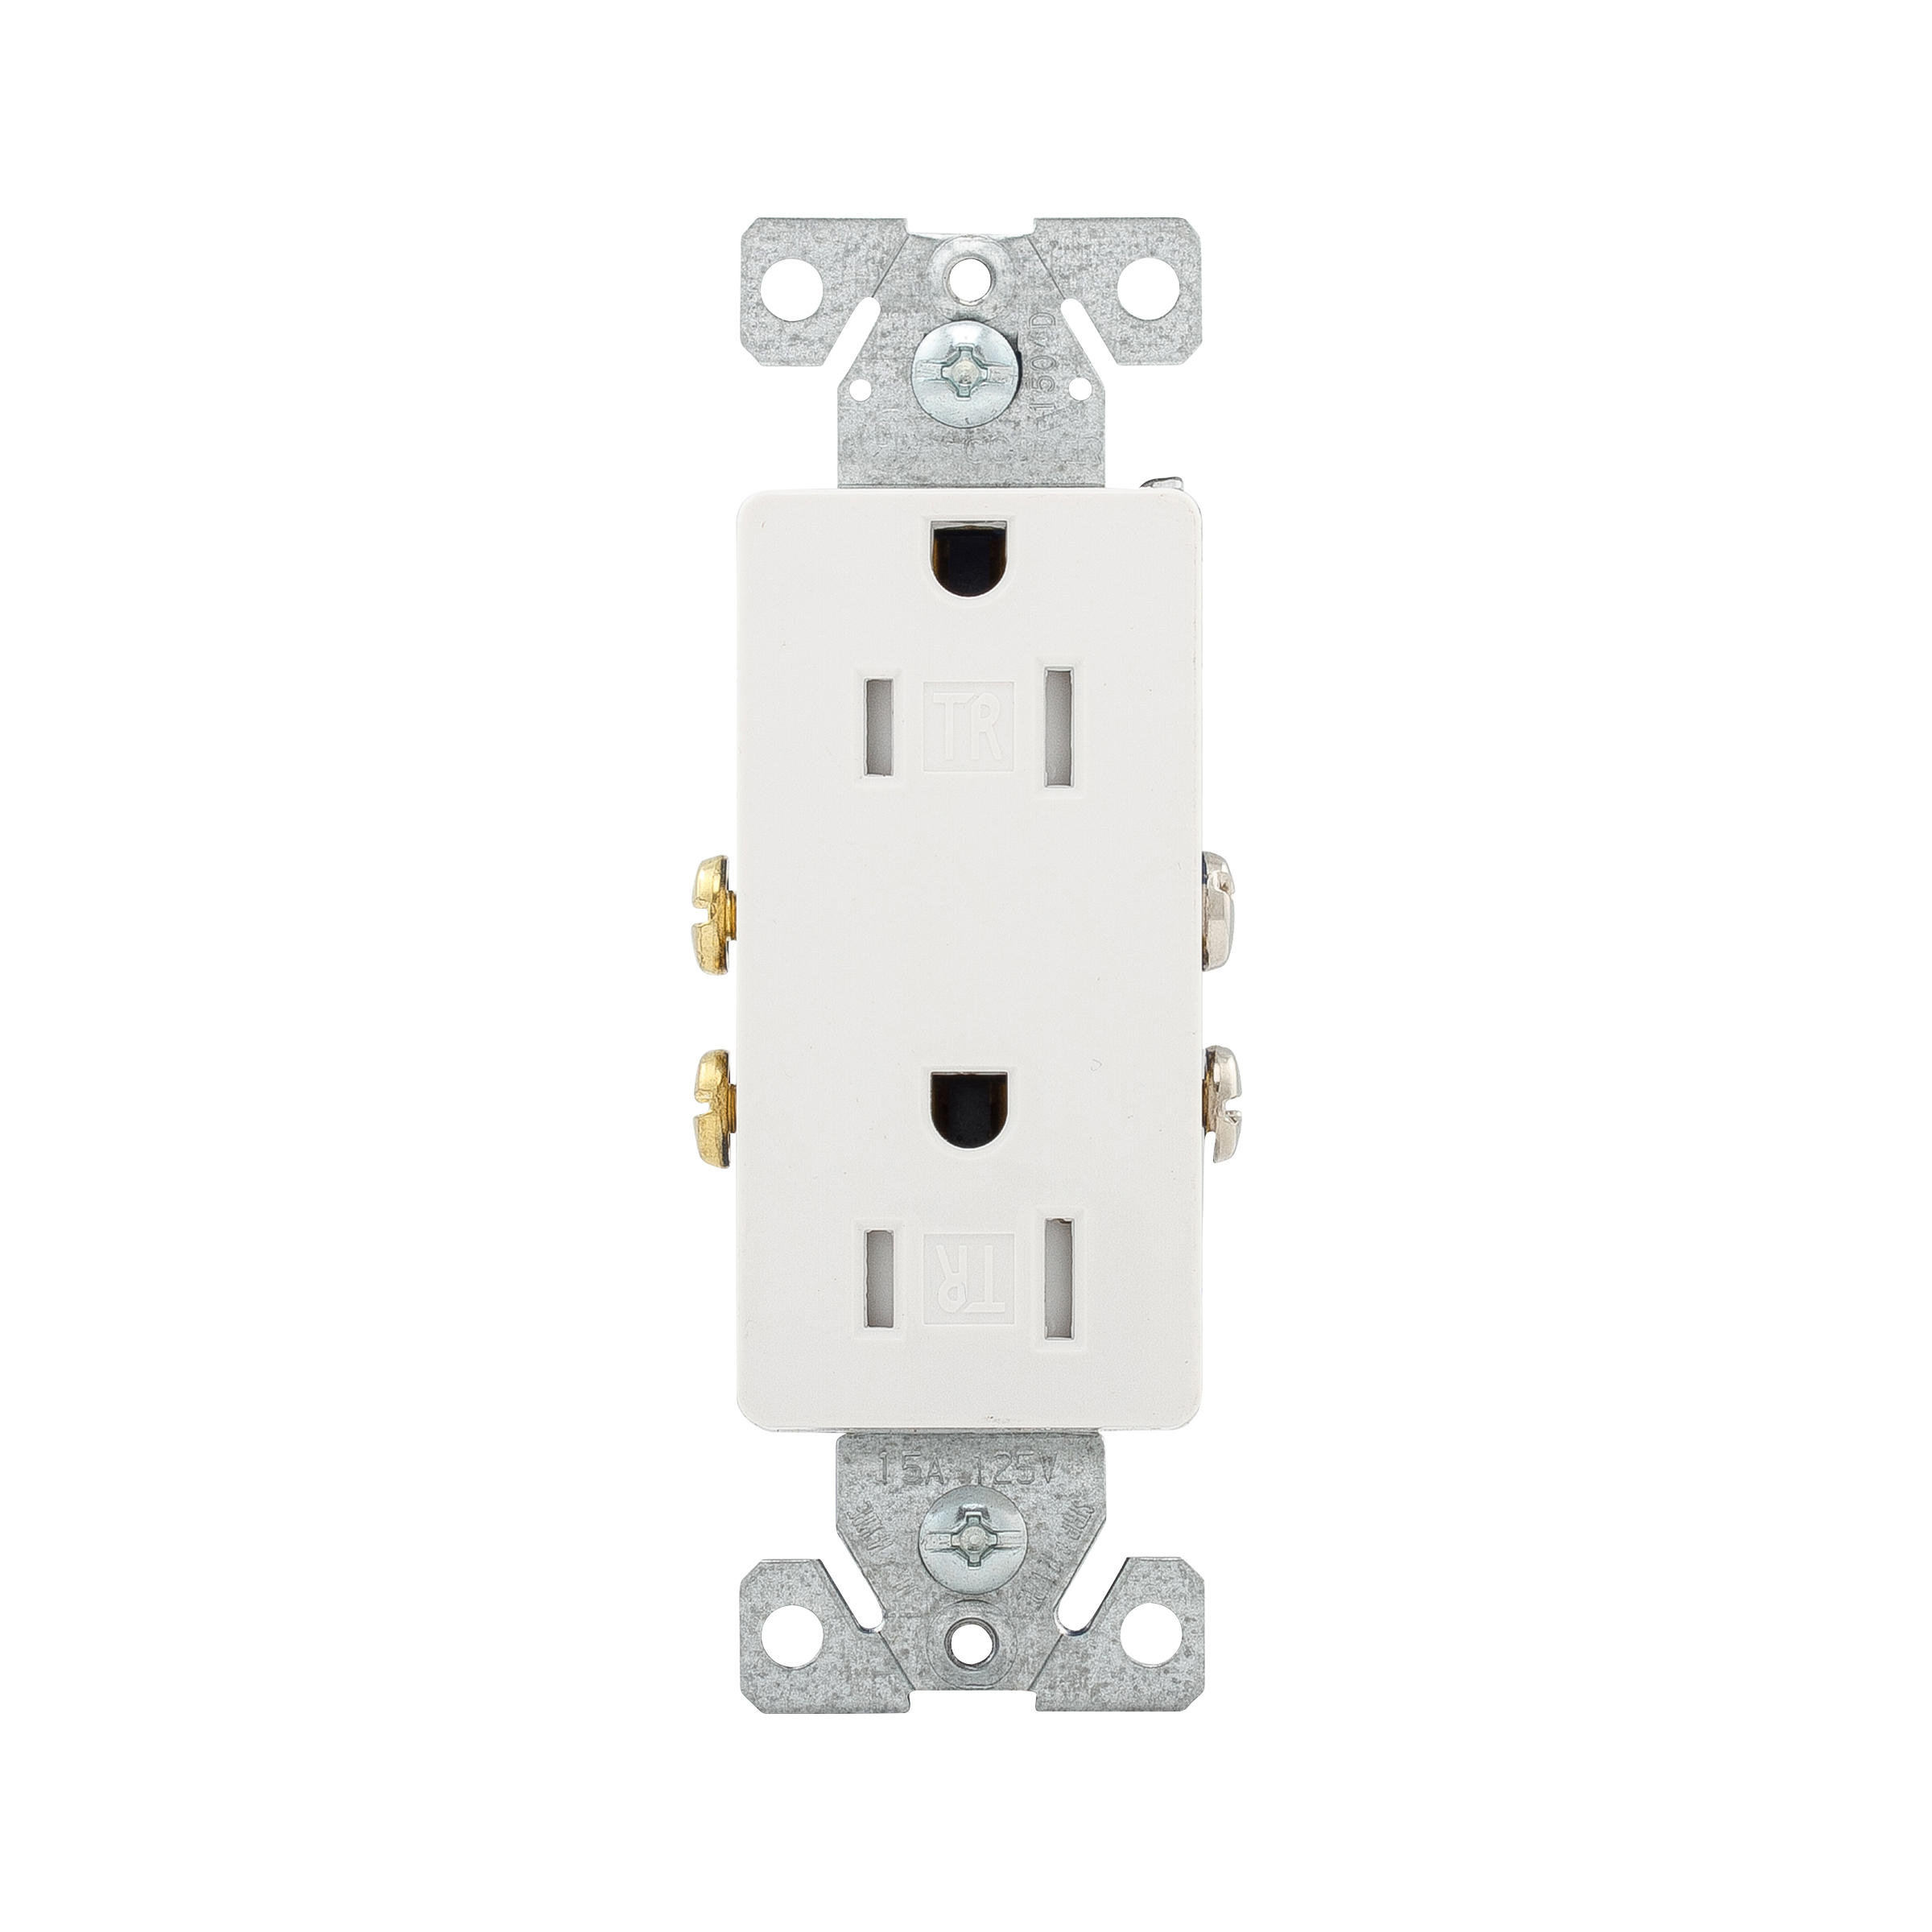 Eaton Residential Grade Decorator Duplex Receptacle, #14-10 Awg, 15A, Flush, 125V, Side And Push White, Brass, Impact-Resistant Thermoplastic Face, Pvc Body, 5-15R, Duplex, Screw, Thermoplastic, Core Pack, Tamper-Resistant